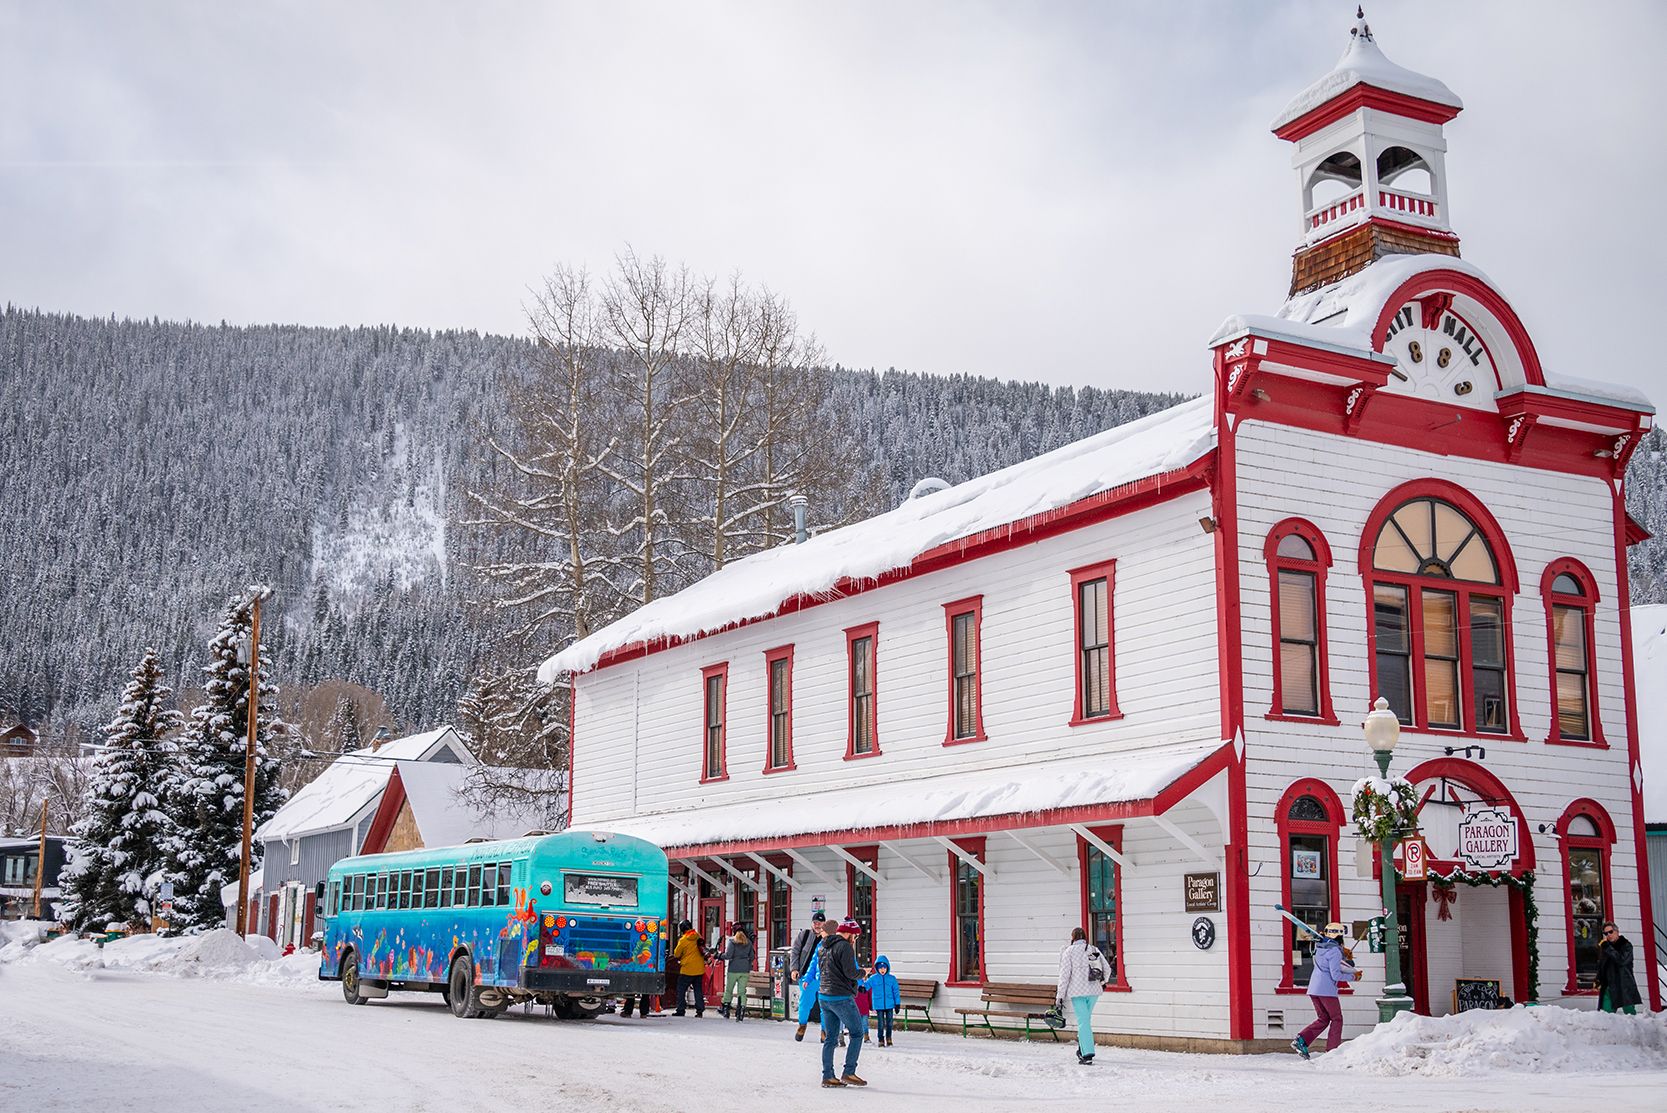 A blue bus stops outside the red and white historic town hall in downtown Crested Butte in winter. 